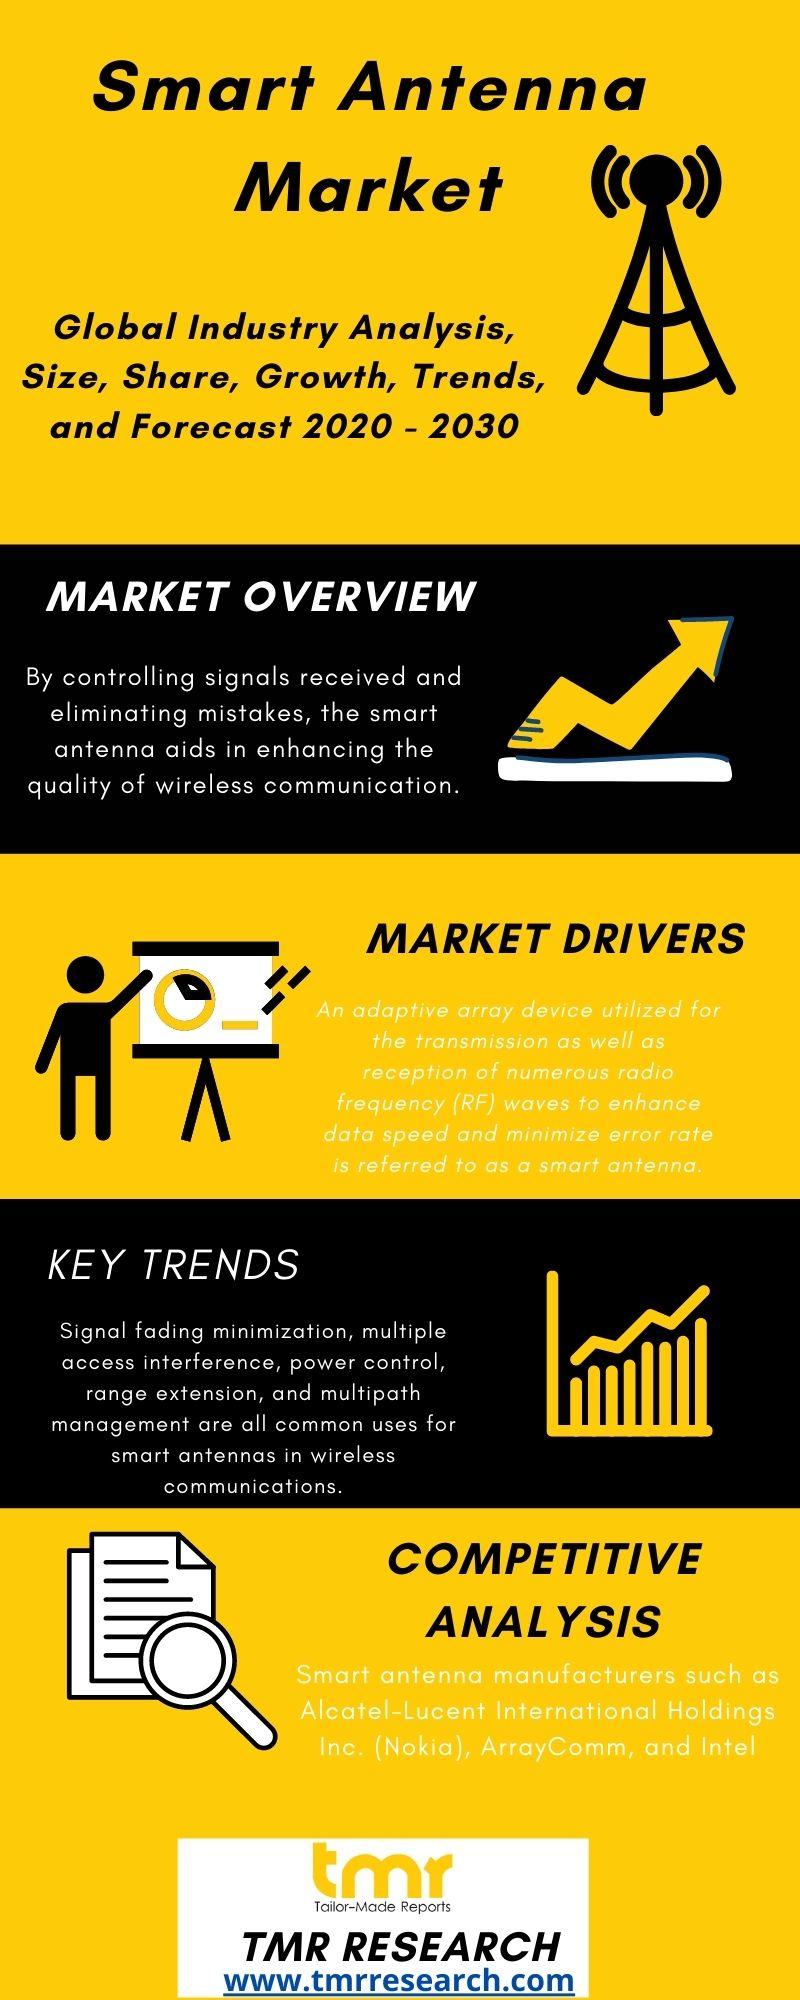 Smart Antenna Market Key Futuristic Top Trends and Competitive